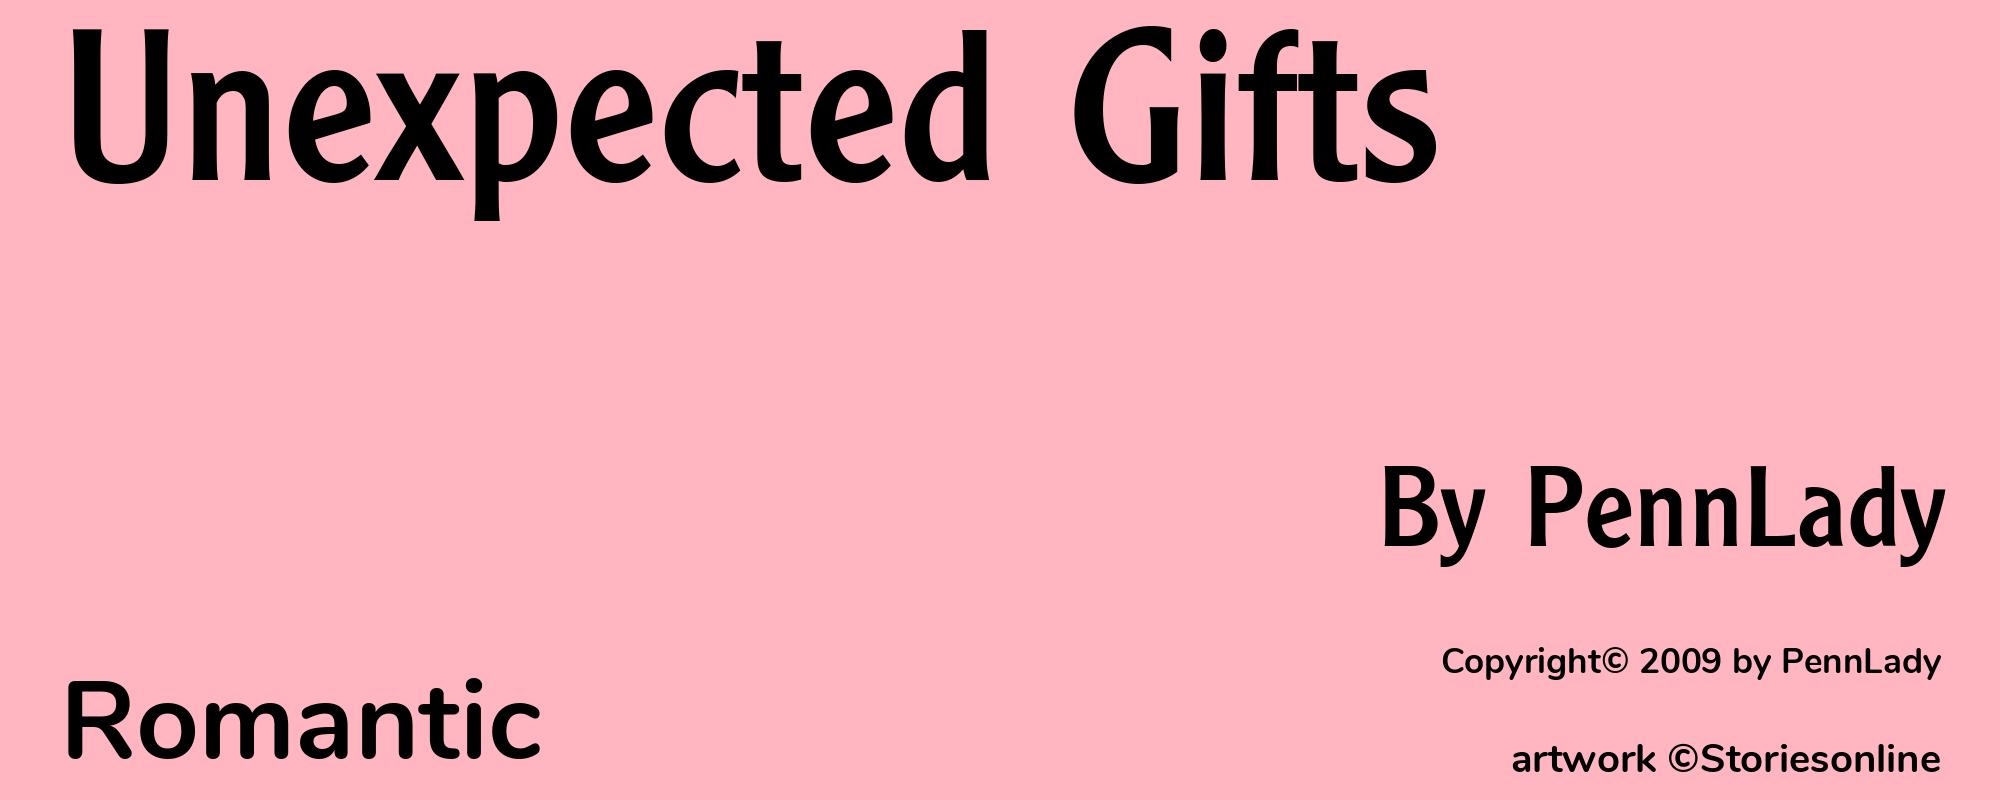 Unexpected Gifts - Cover